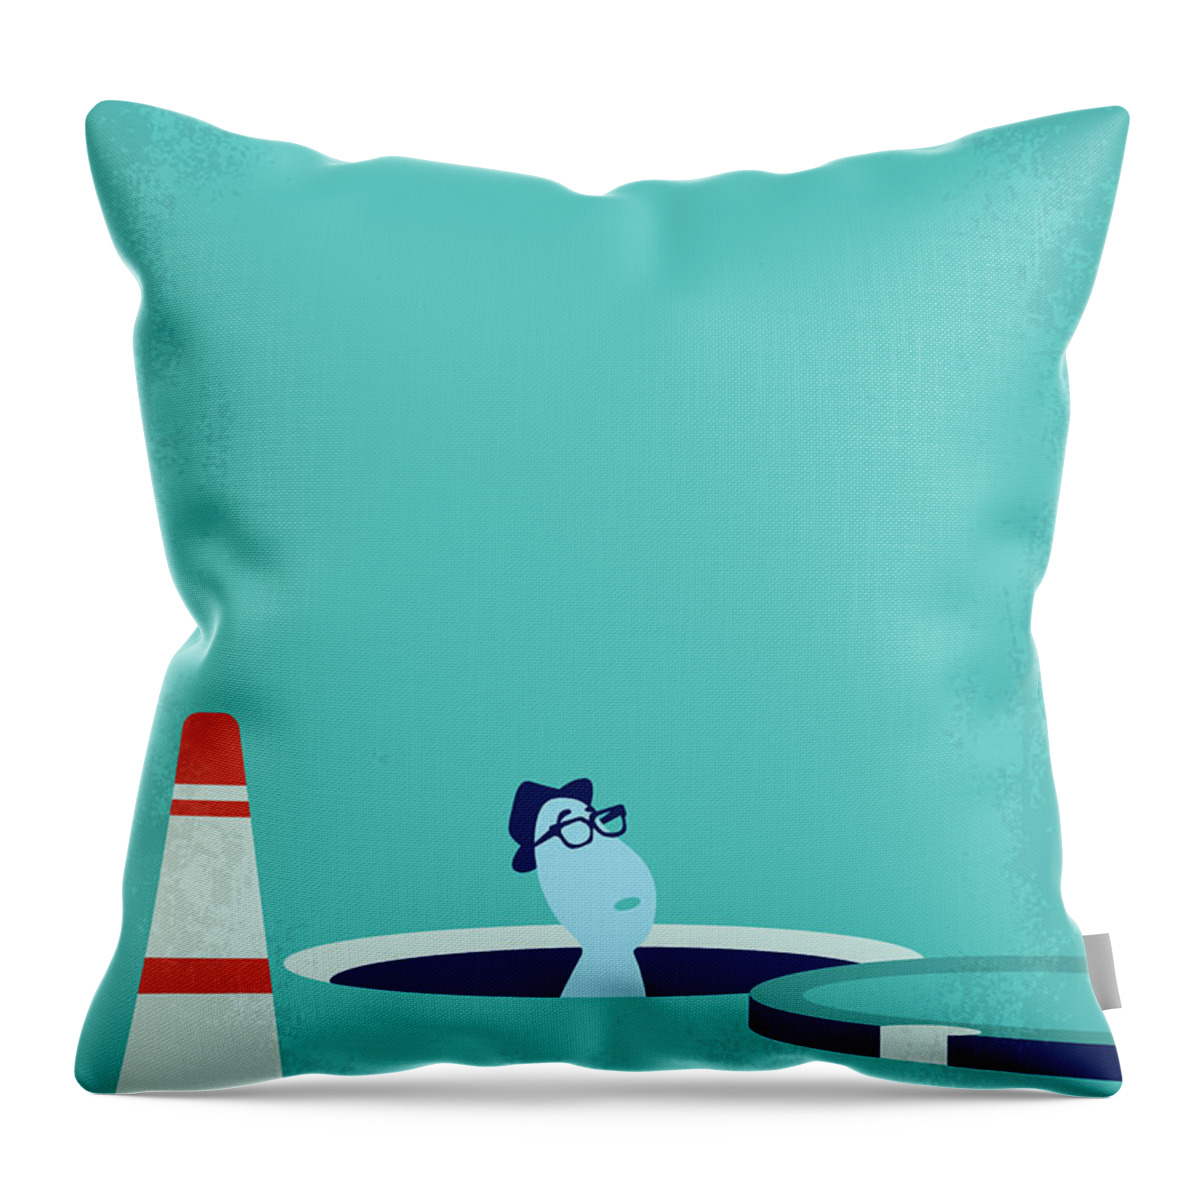 Soul Throw Pillow featuring the digital art No1249 My Soul minimal movie poster by Chungkong Art